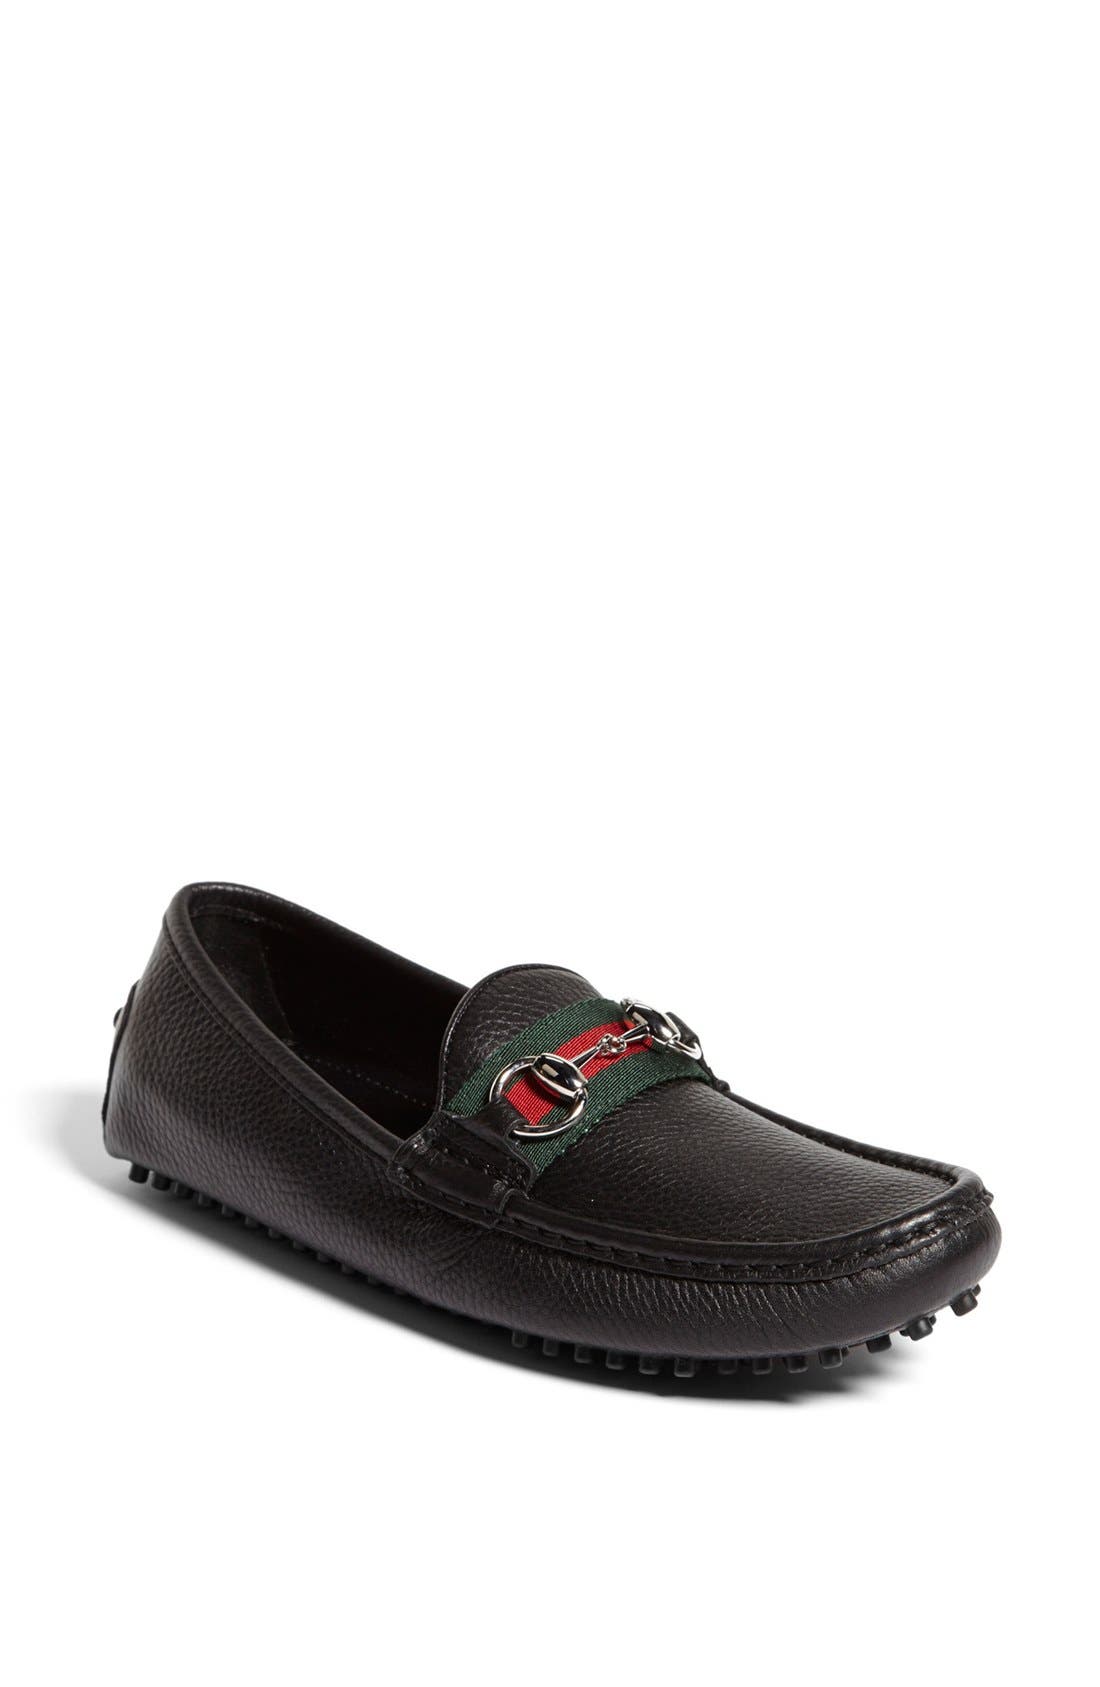 gucci driving loafers women's